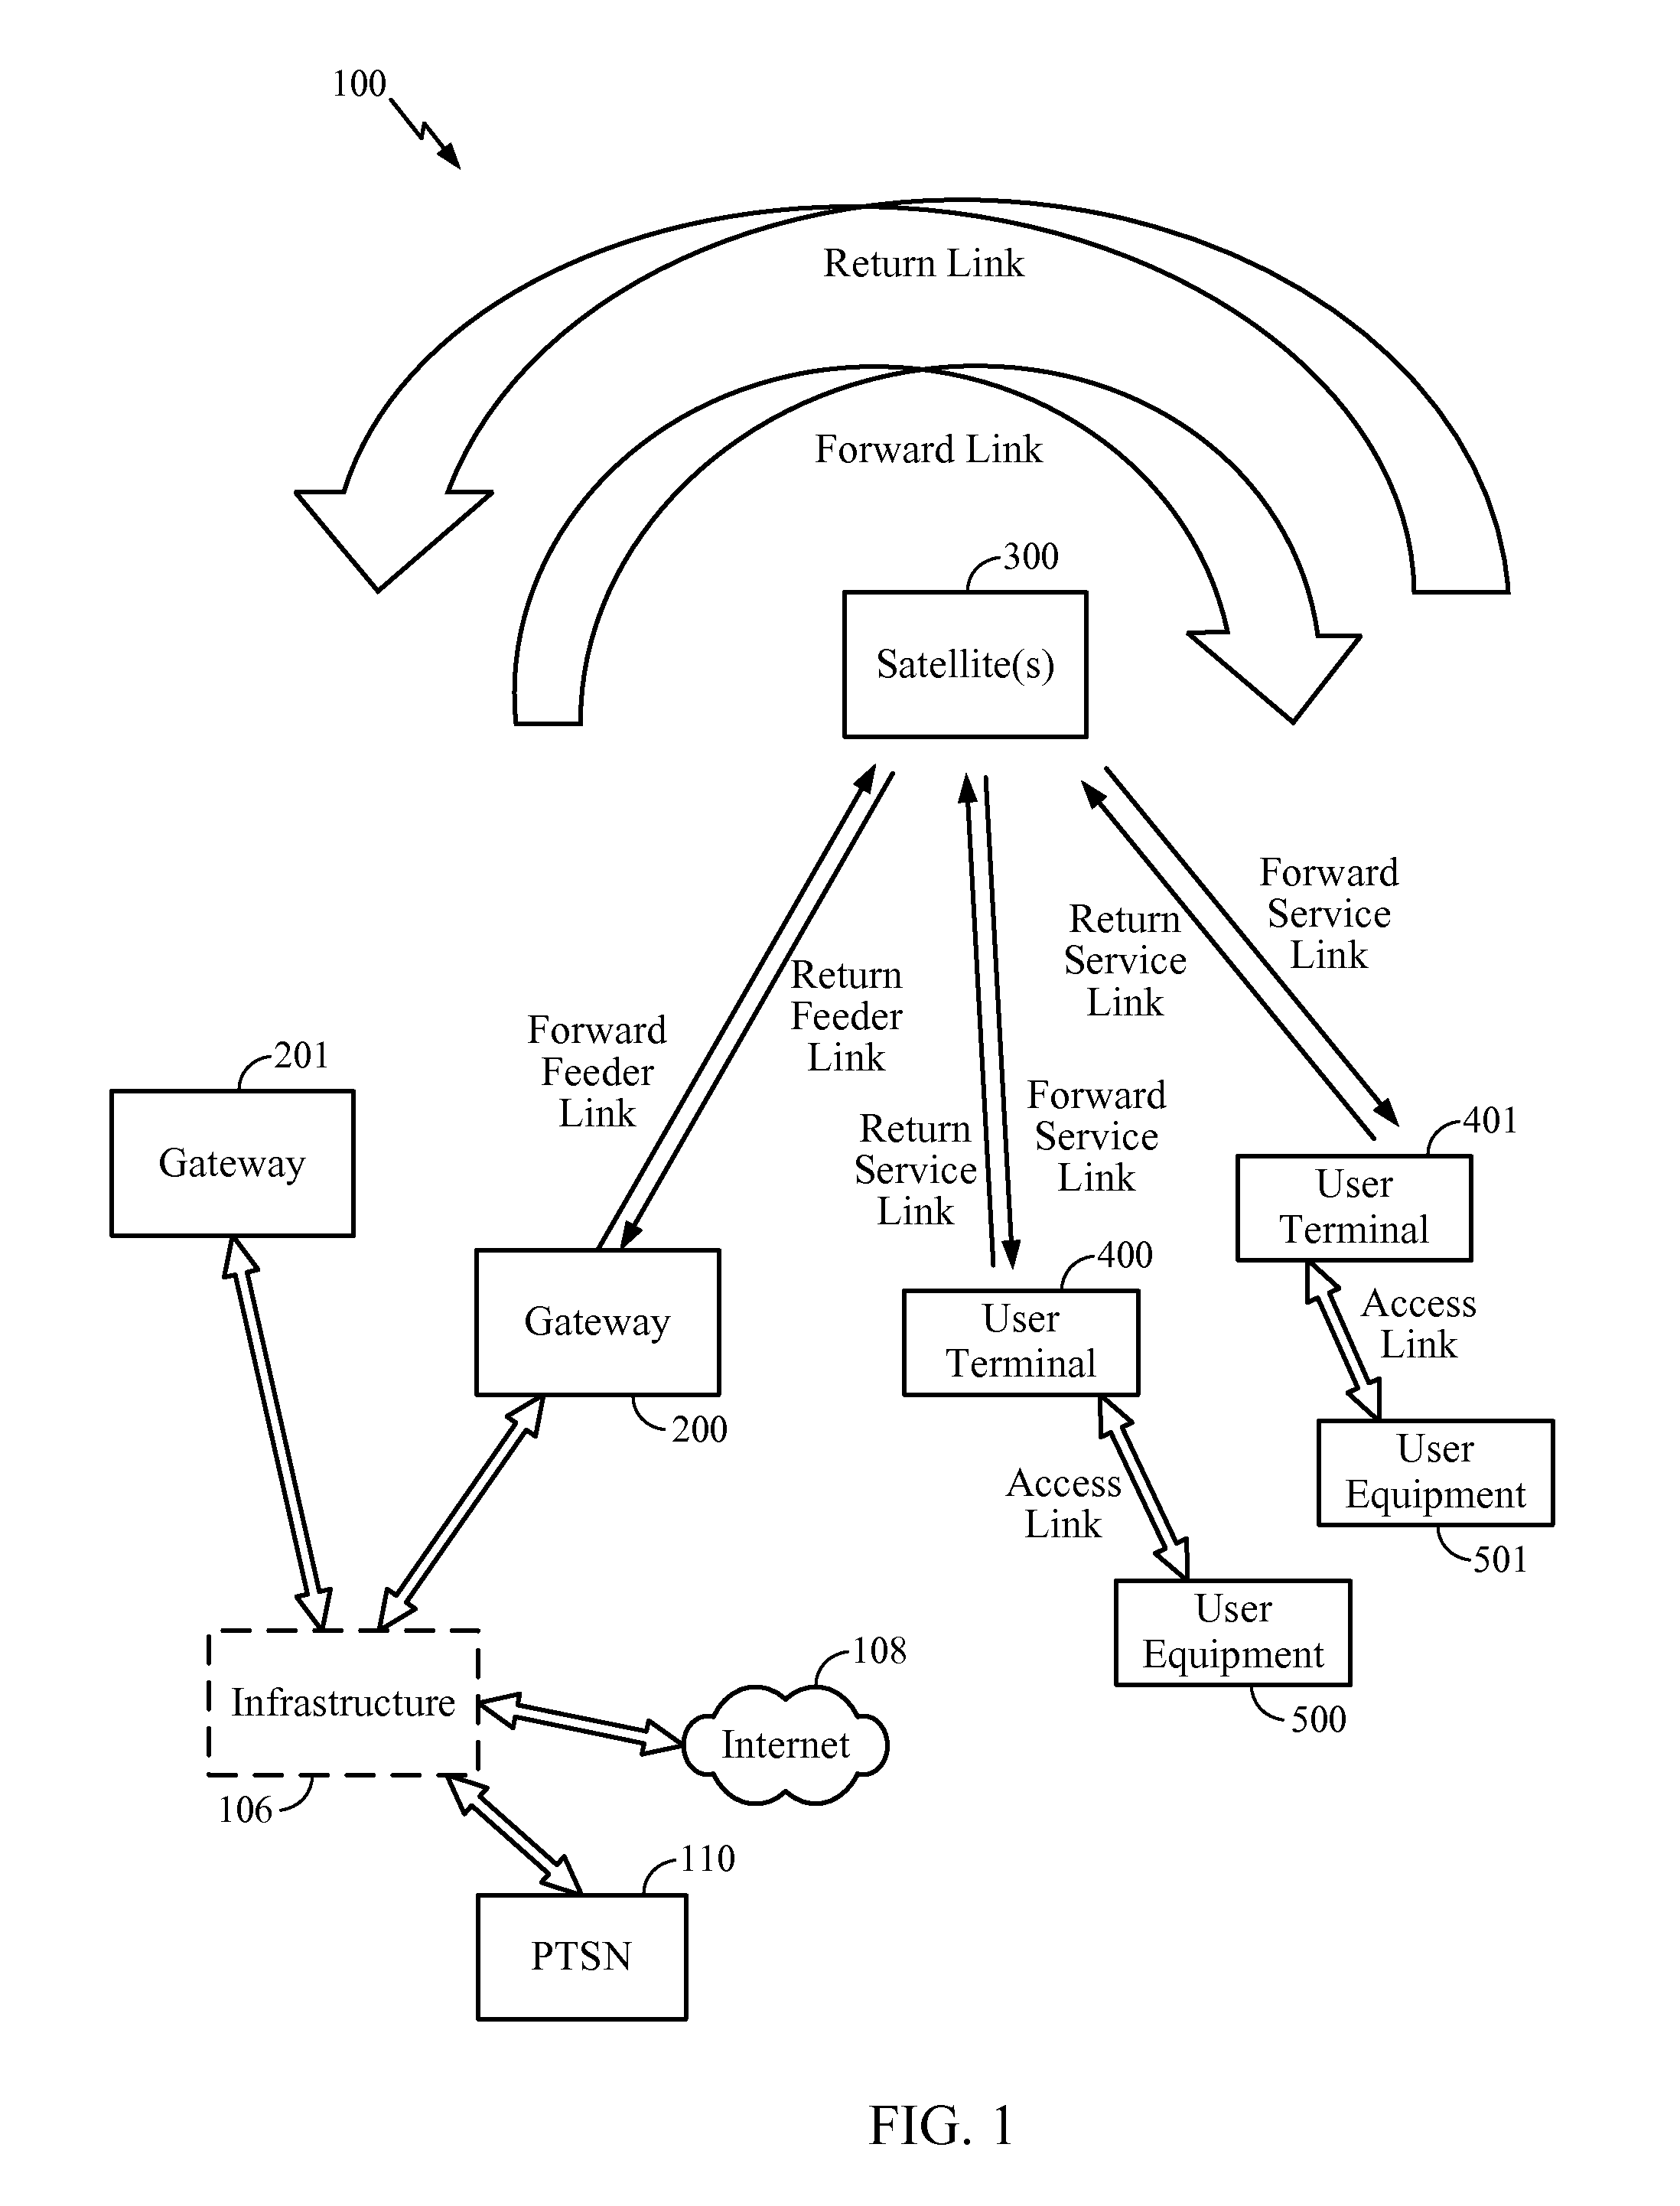 Method and apparatus for avoiding exceeding interference limits for a non-geostationary satellite system